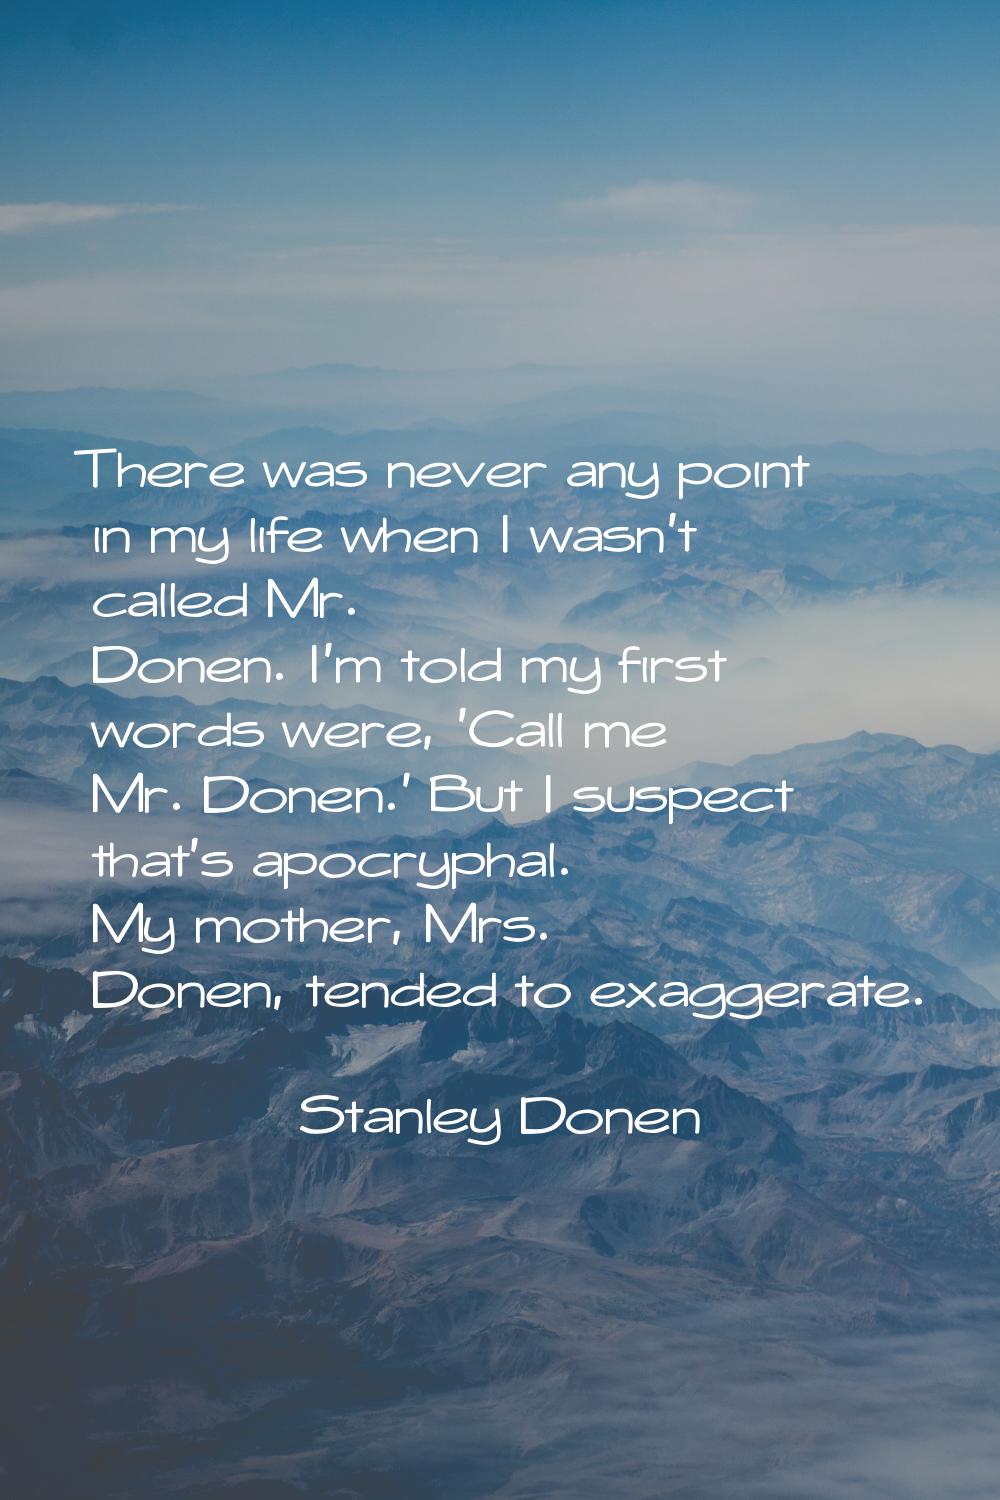 There was never any point in my life when I wasn't called Mr. Donen. I'm told my first words were, 